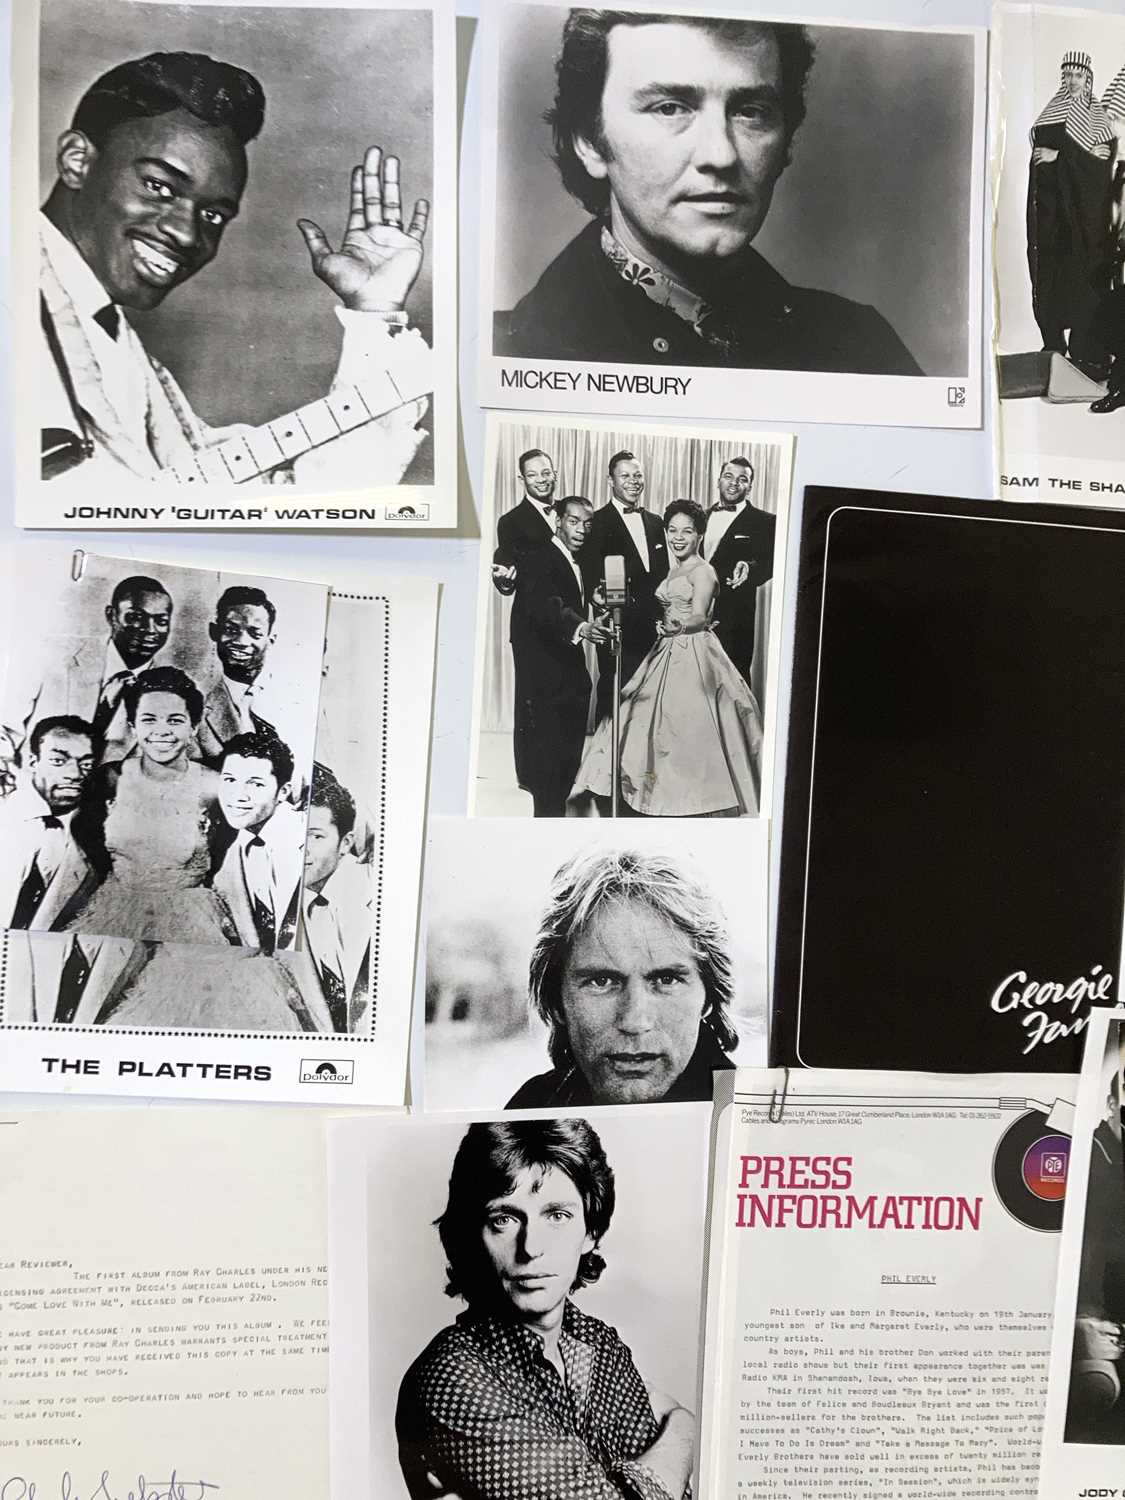 PRESS KIT ARCHIVE - ROCK N ROLL ARTISTS. - Image 5 of 5